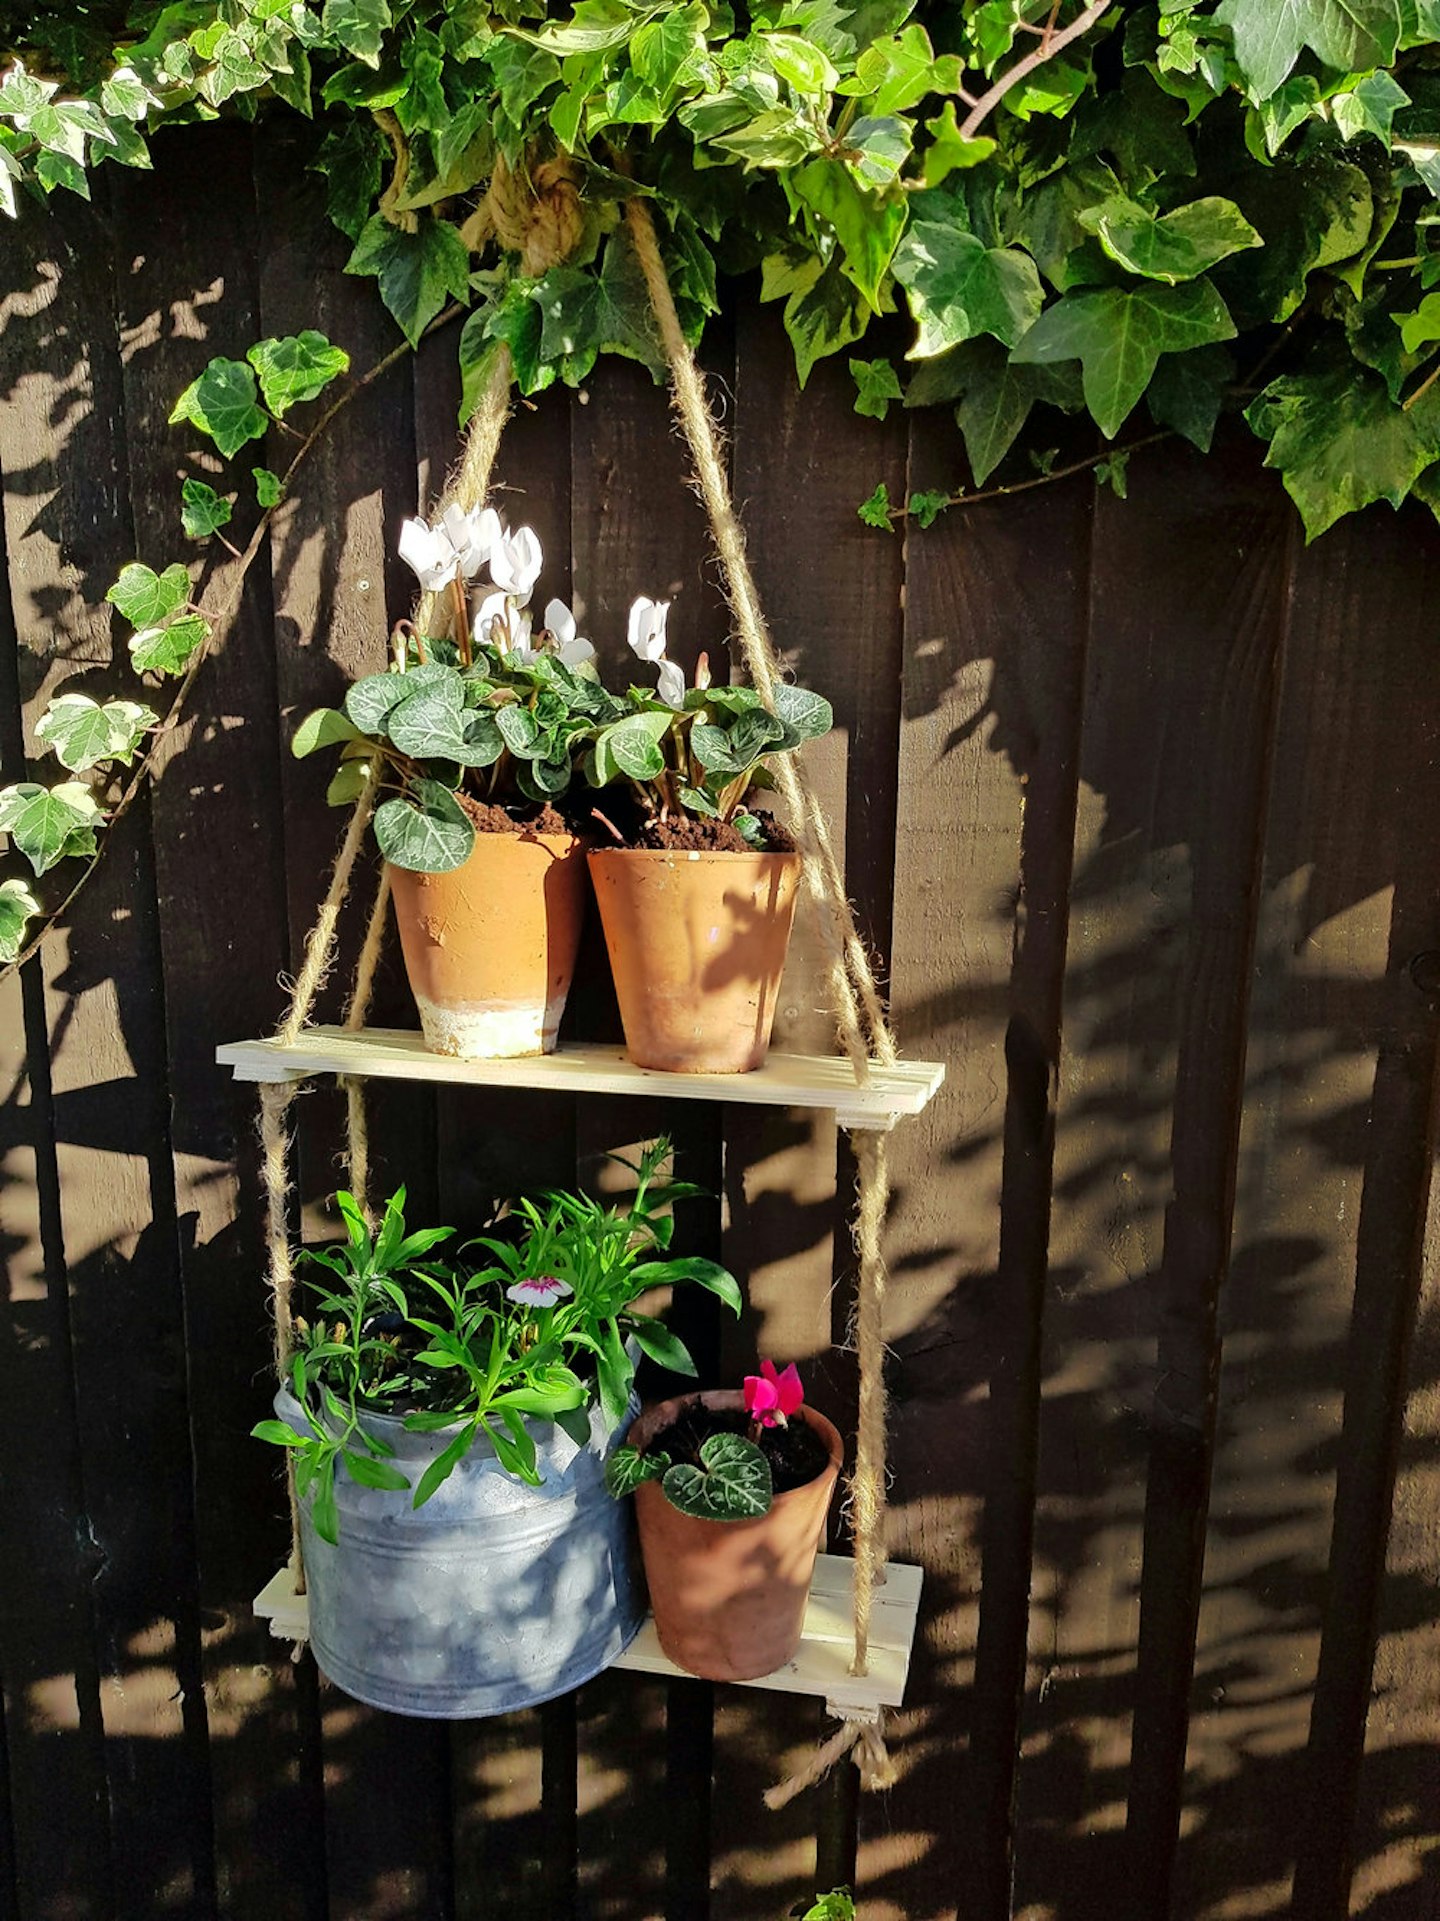 Craft Ideas | Upcycle A Pallet Into Rustic Rope Shelves